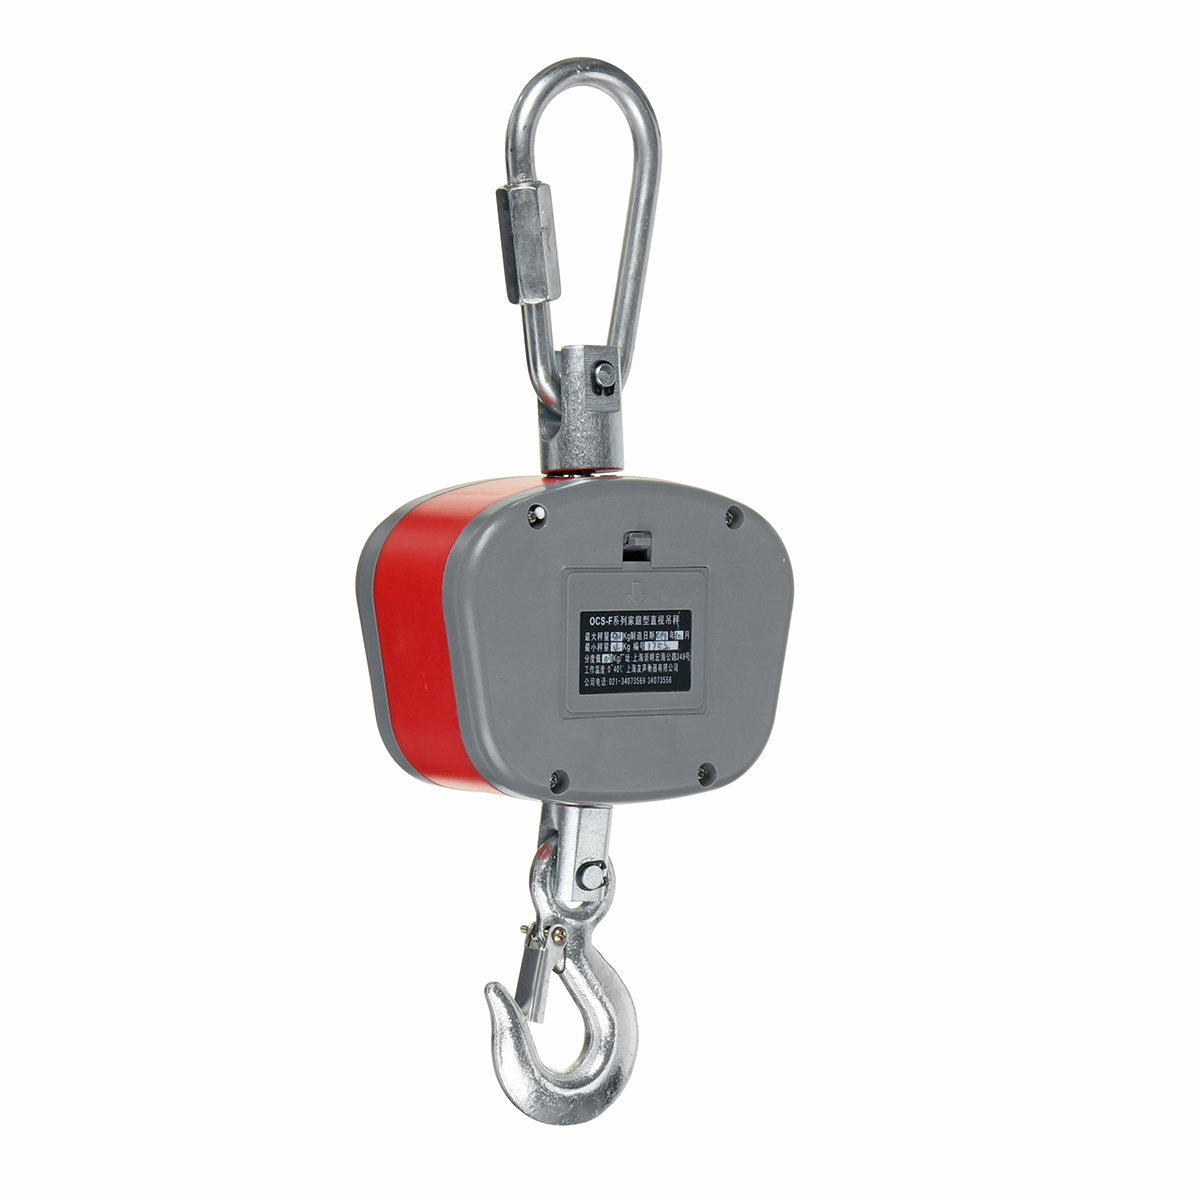 300/500KG High Precision Digital Crane Scale Heavy Duty Hanging Scale LCD Weighing Scales High Accurate Hanging Scale